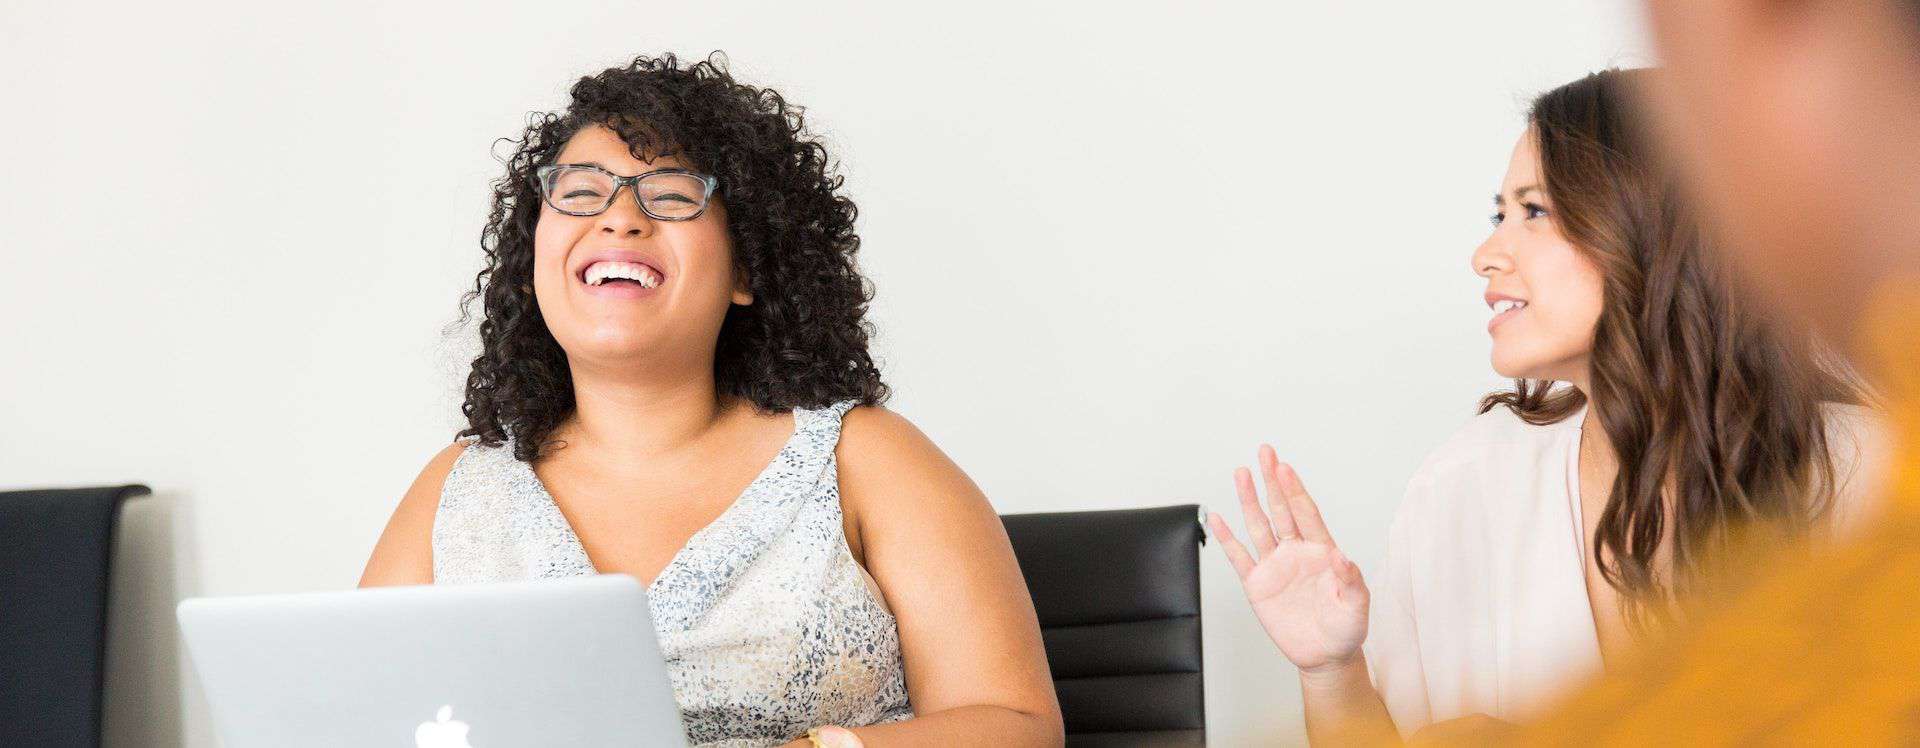 Joyful collaboration: a woman laughing and enjoying a lively discussion with a colleague during a meeting.